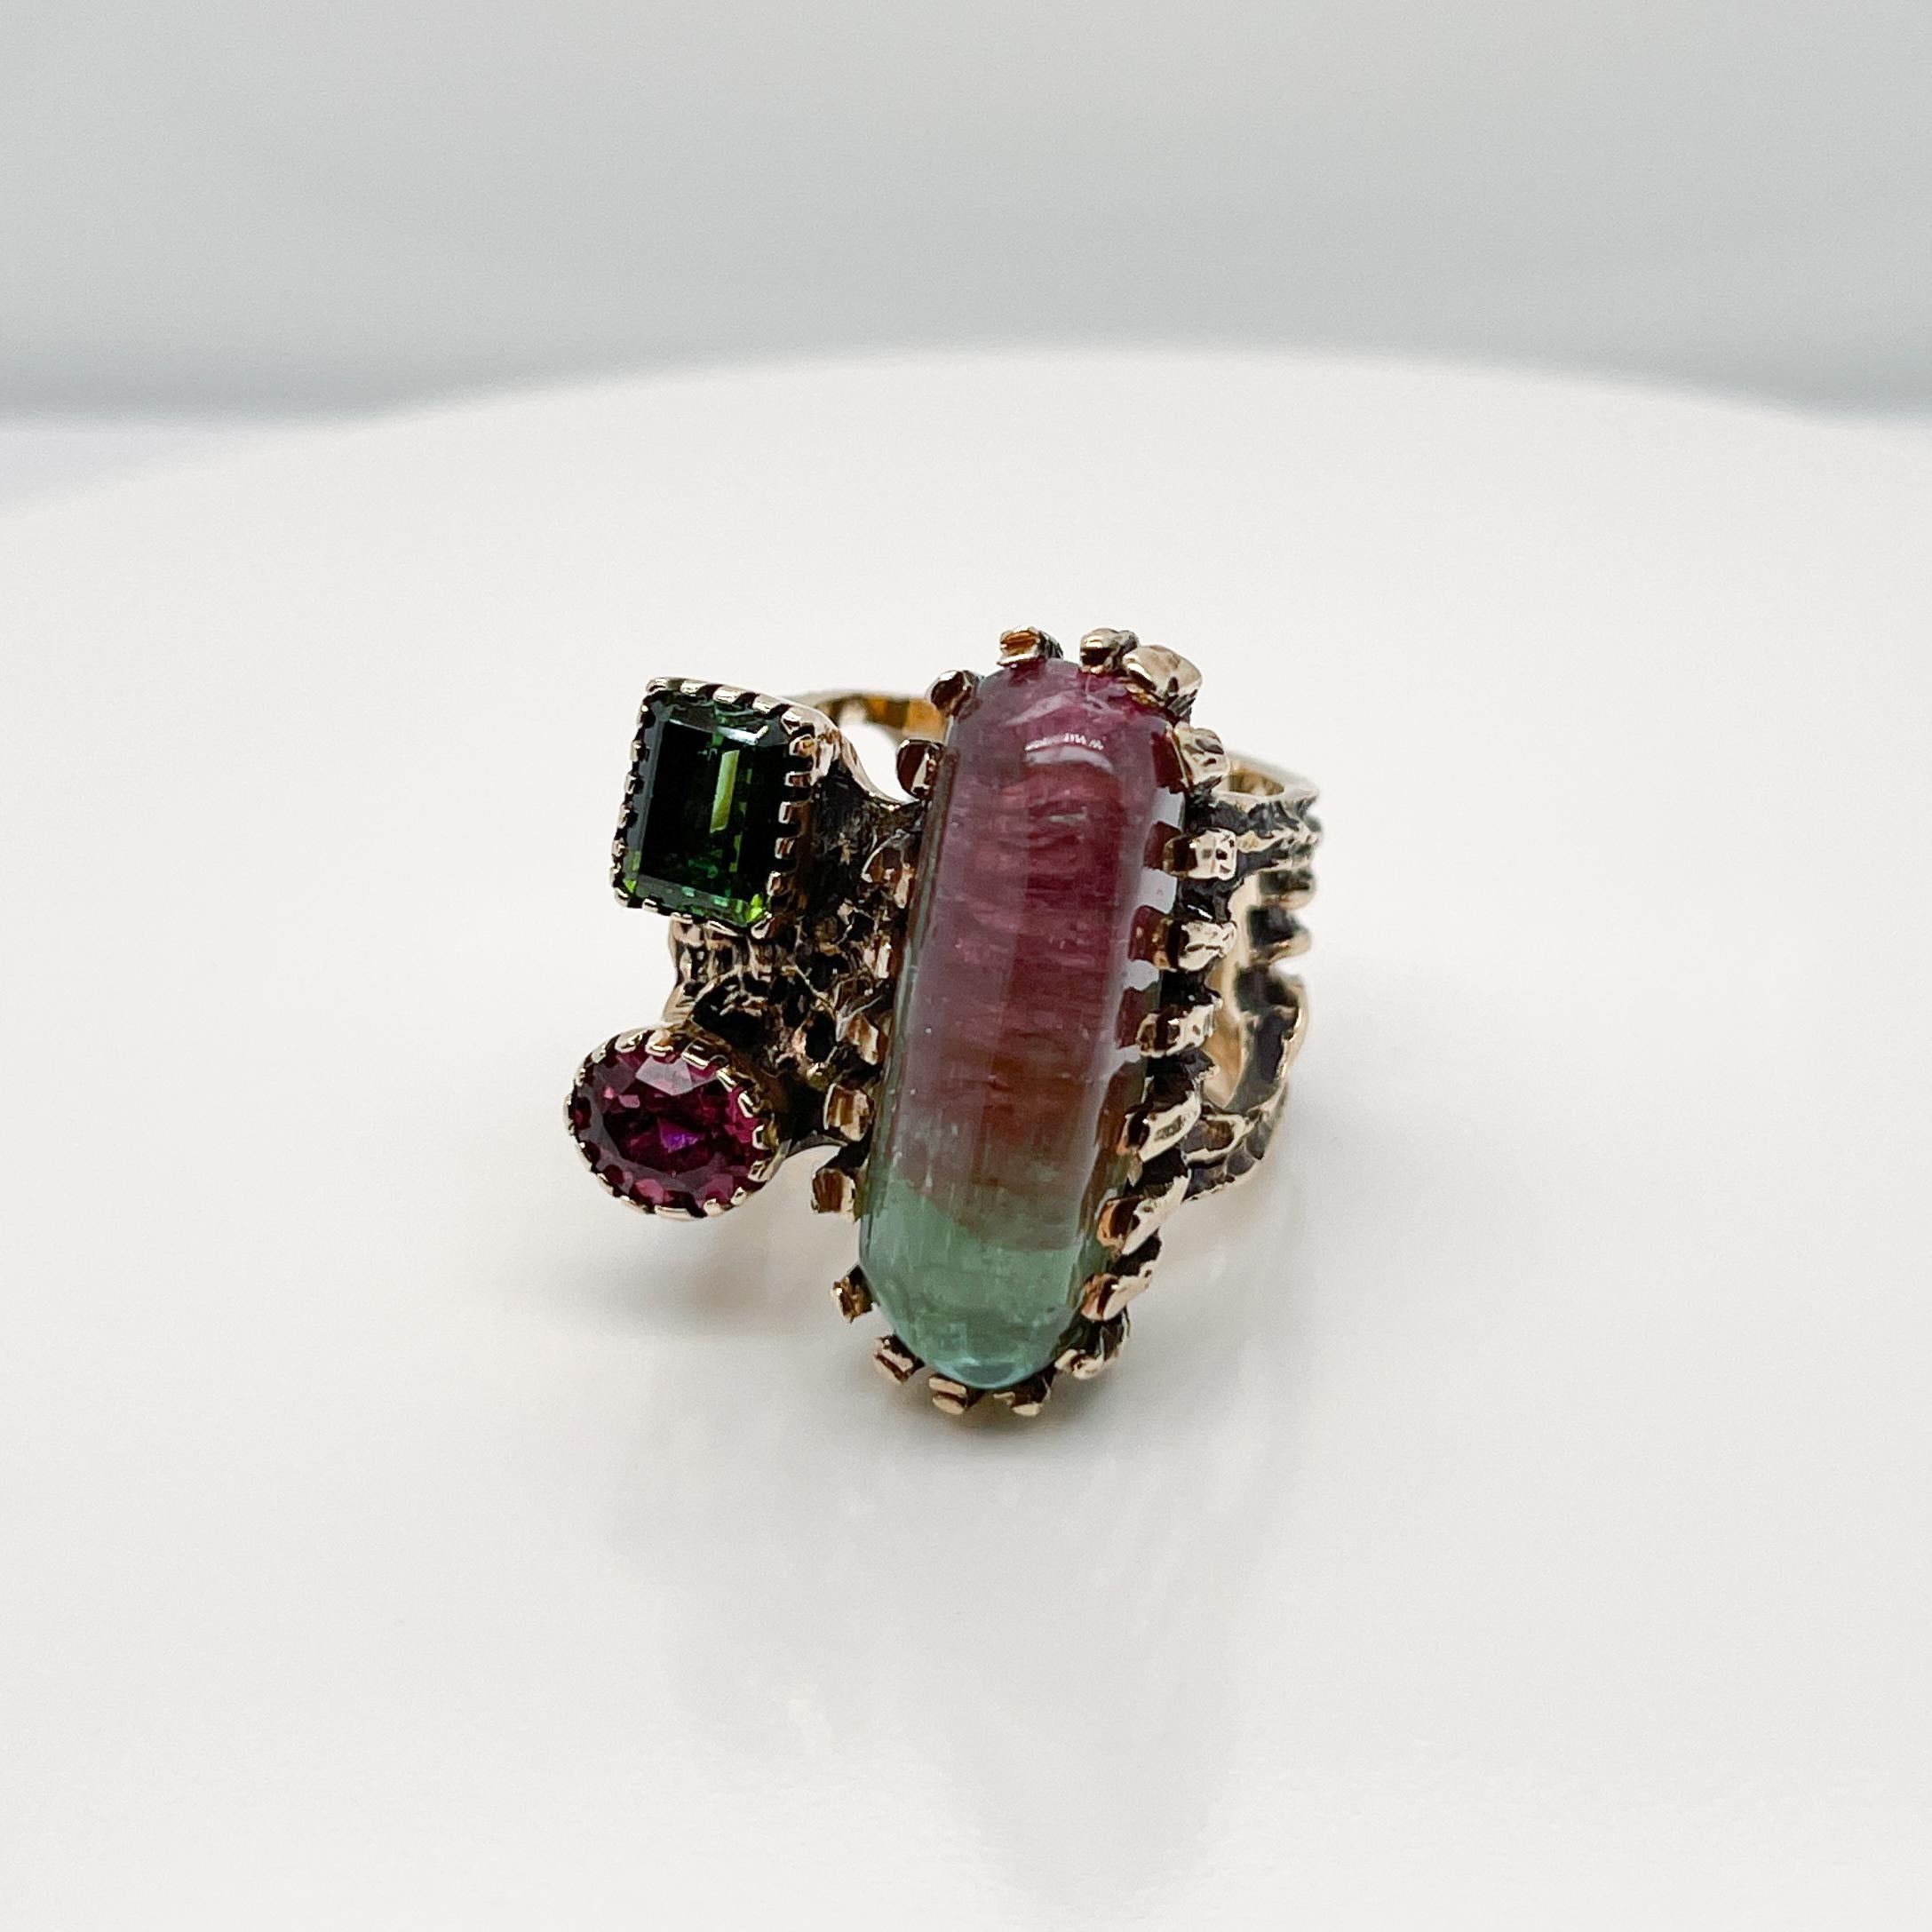 A very fine gold and tourmaline cocktail ring.

With an elongated watermelon tourmaline, a rectangular green tourmaline and an oval pink tourmaline prong set in 14k gold. 

Simply a gorgeous Brutalist cocktail ring!

Date:
20th Century

Overall